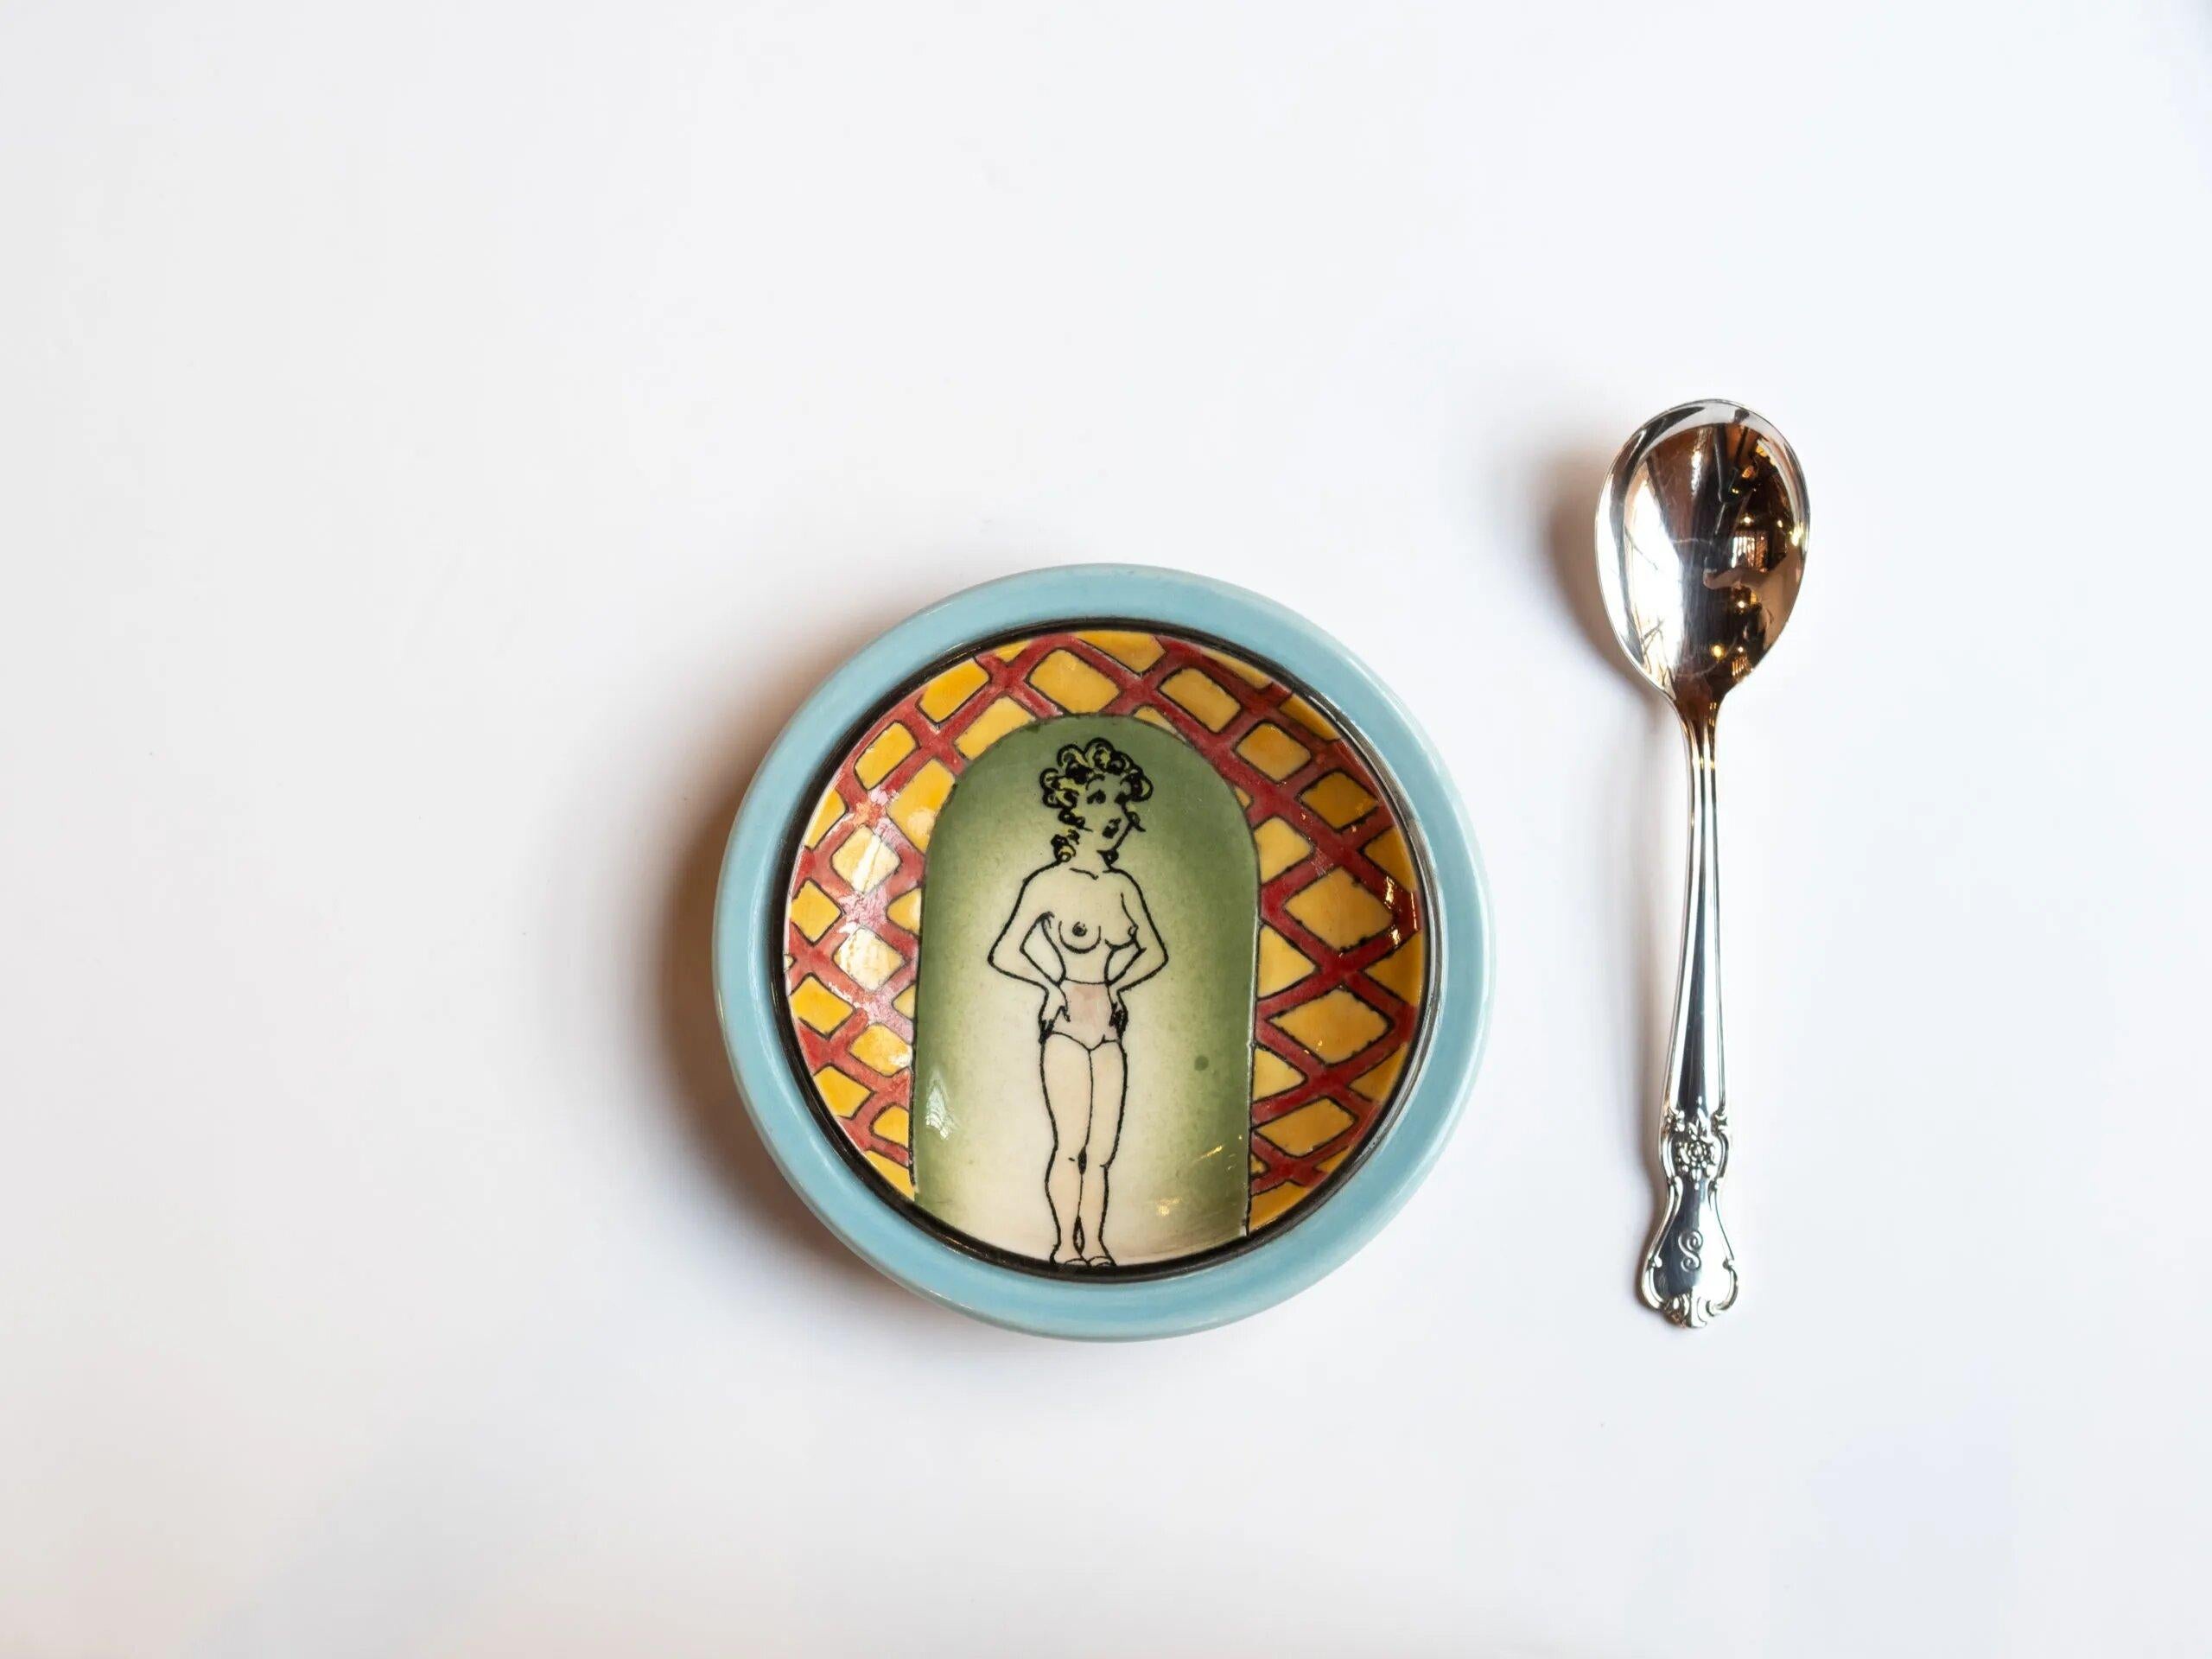 Ceramic Pop Art Checkered Nude Woman Hanging Plate 2